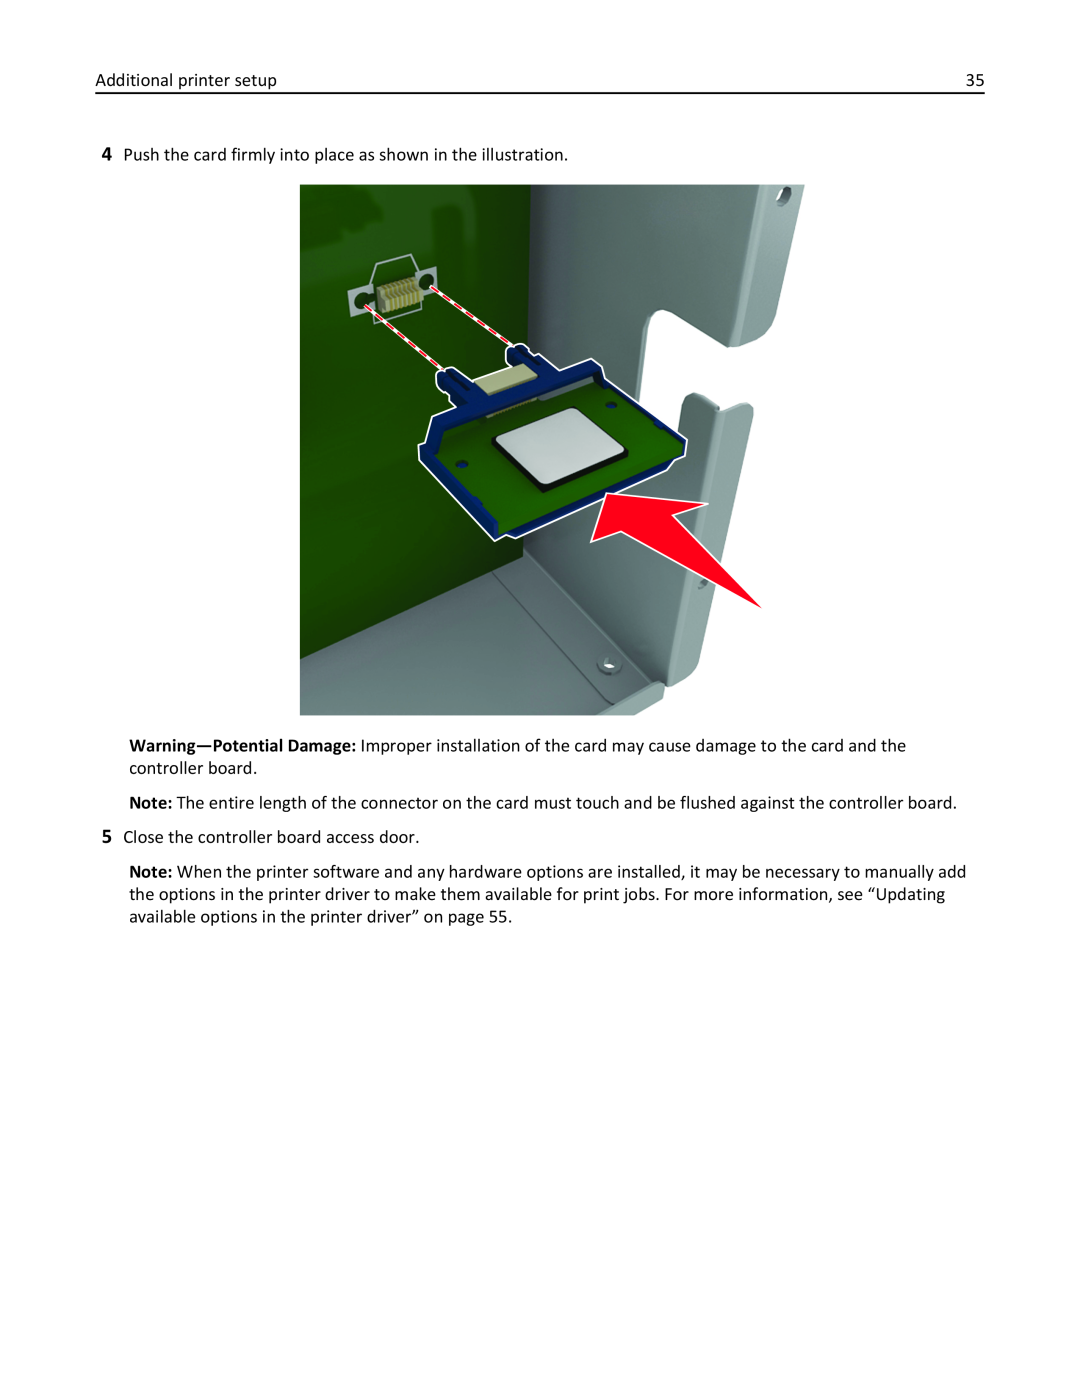 Lexmark MX710DHE, 24T7310, 237, 037 Additional printer setup, Push the card firmly into place as shown in the illustration 